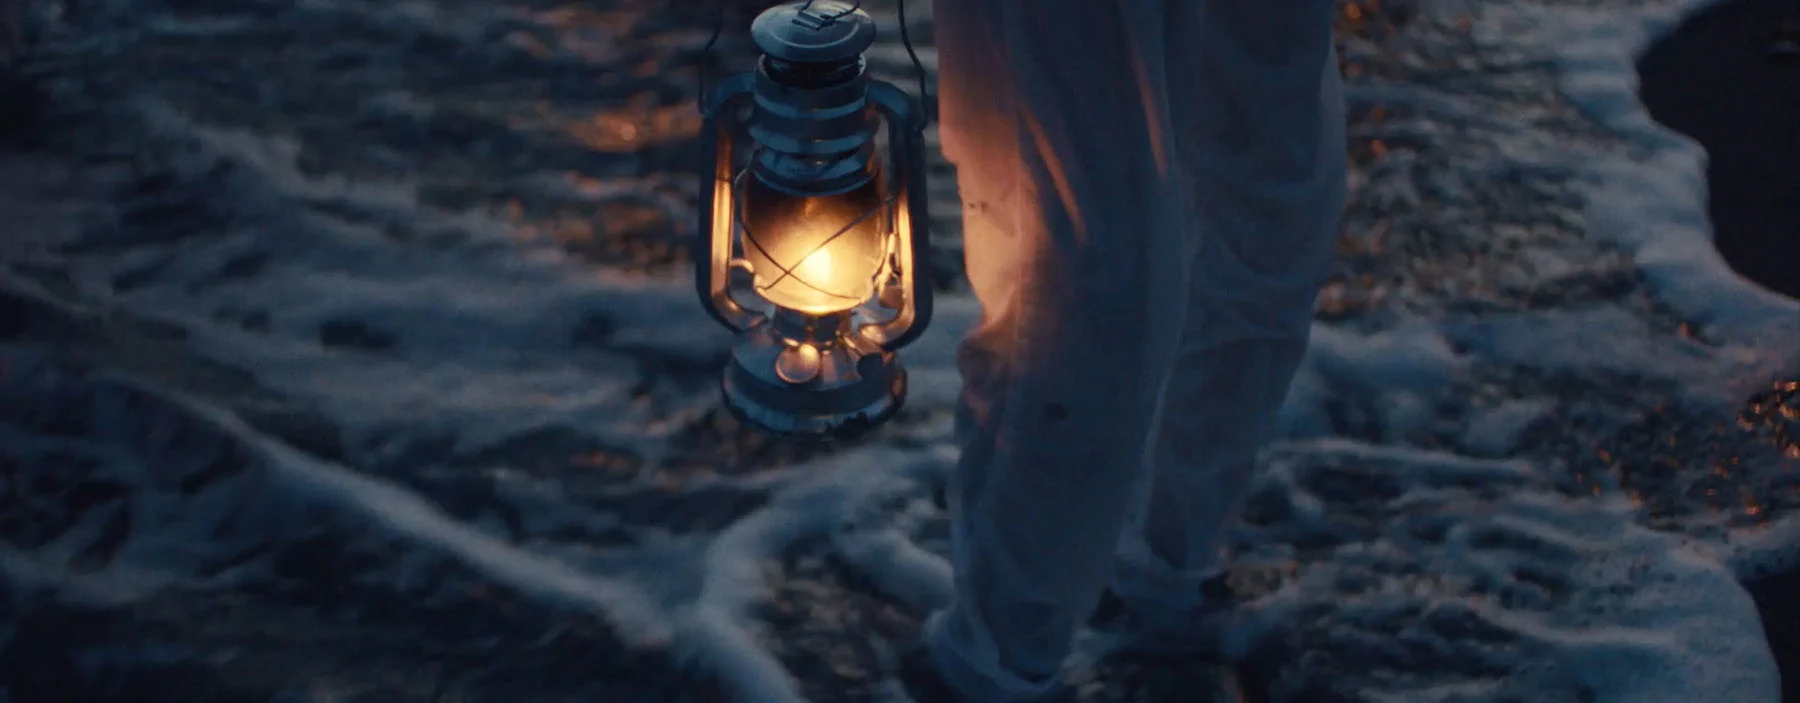 An extract from the film "Blue Eyes by Andre Muir," showing a group of people slowly walking into the sea, holding lanterns.